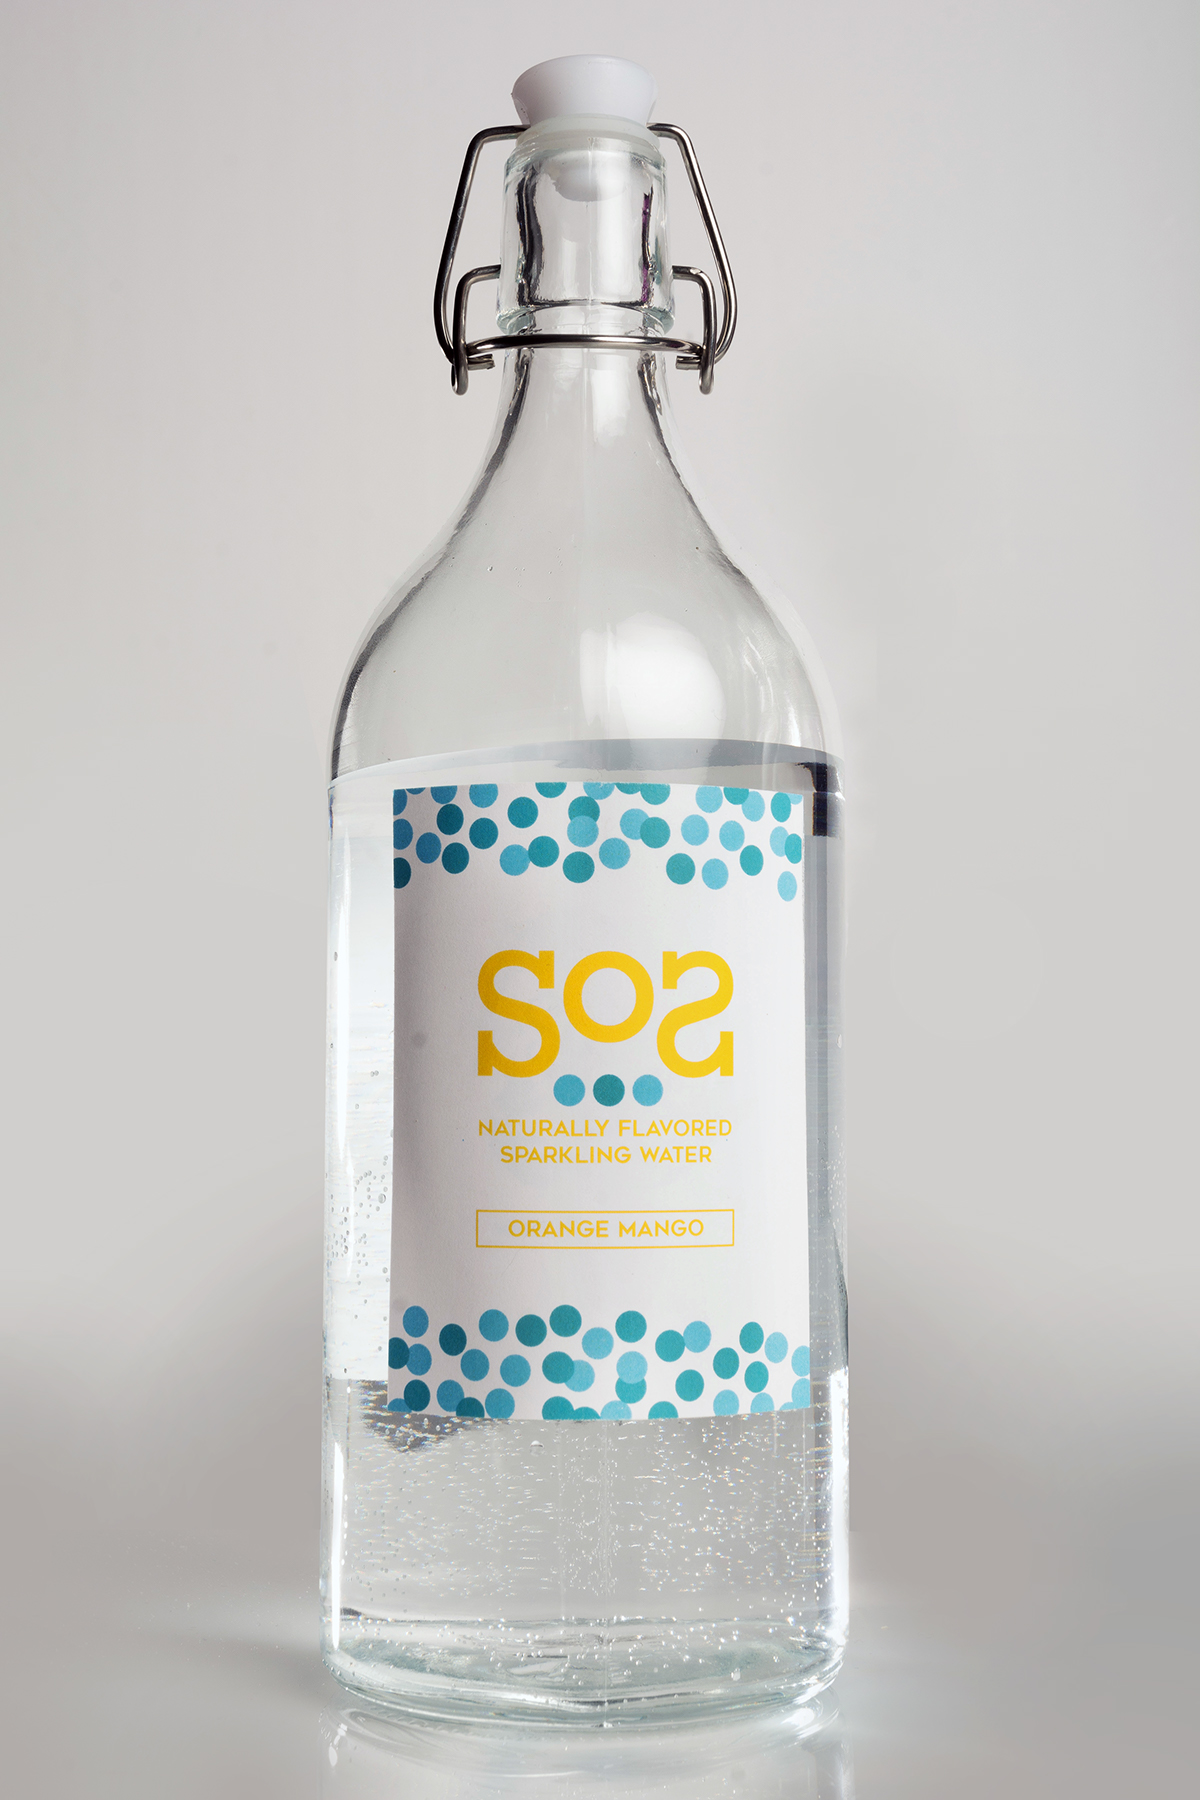 Sos Flavored Sparkling Water glass Water Bottles